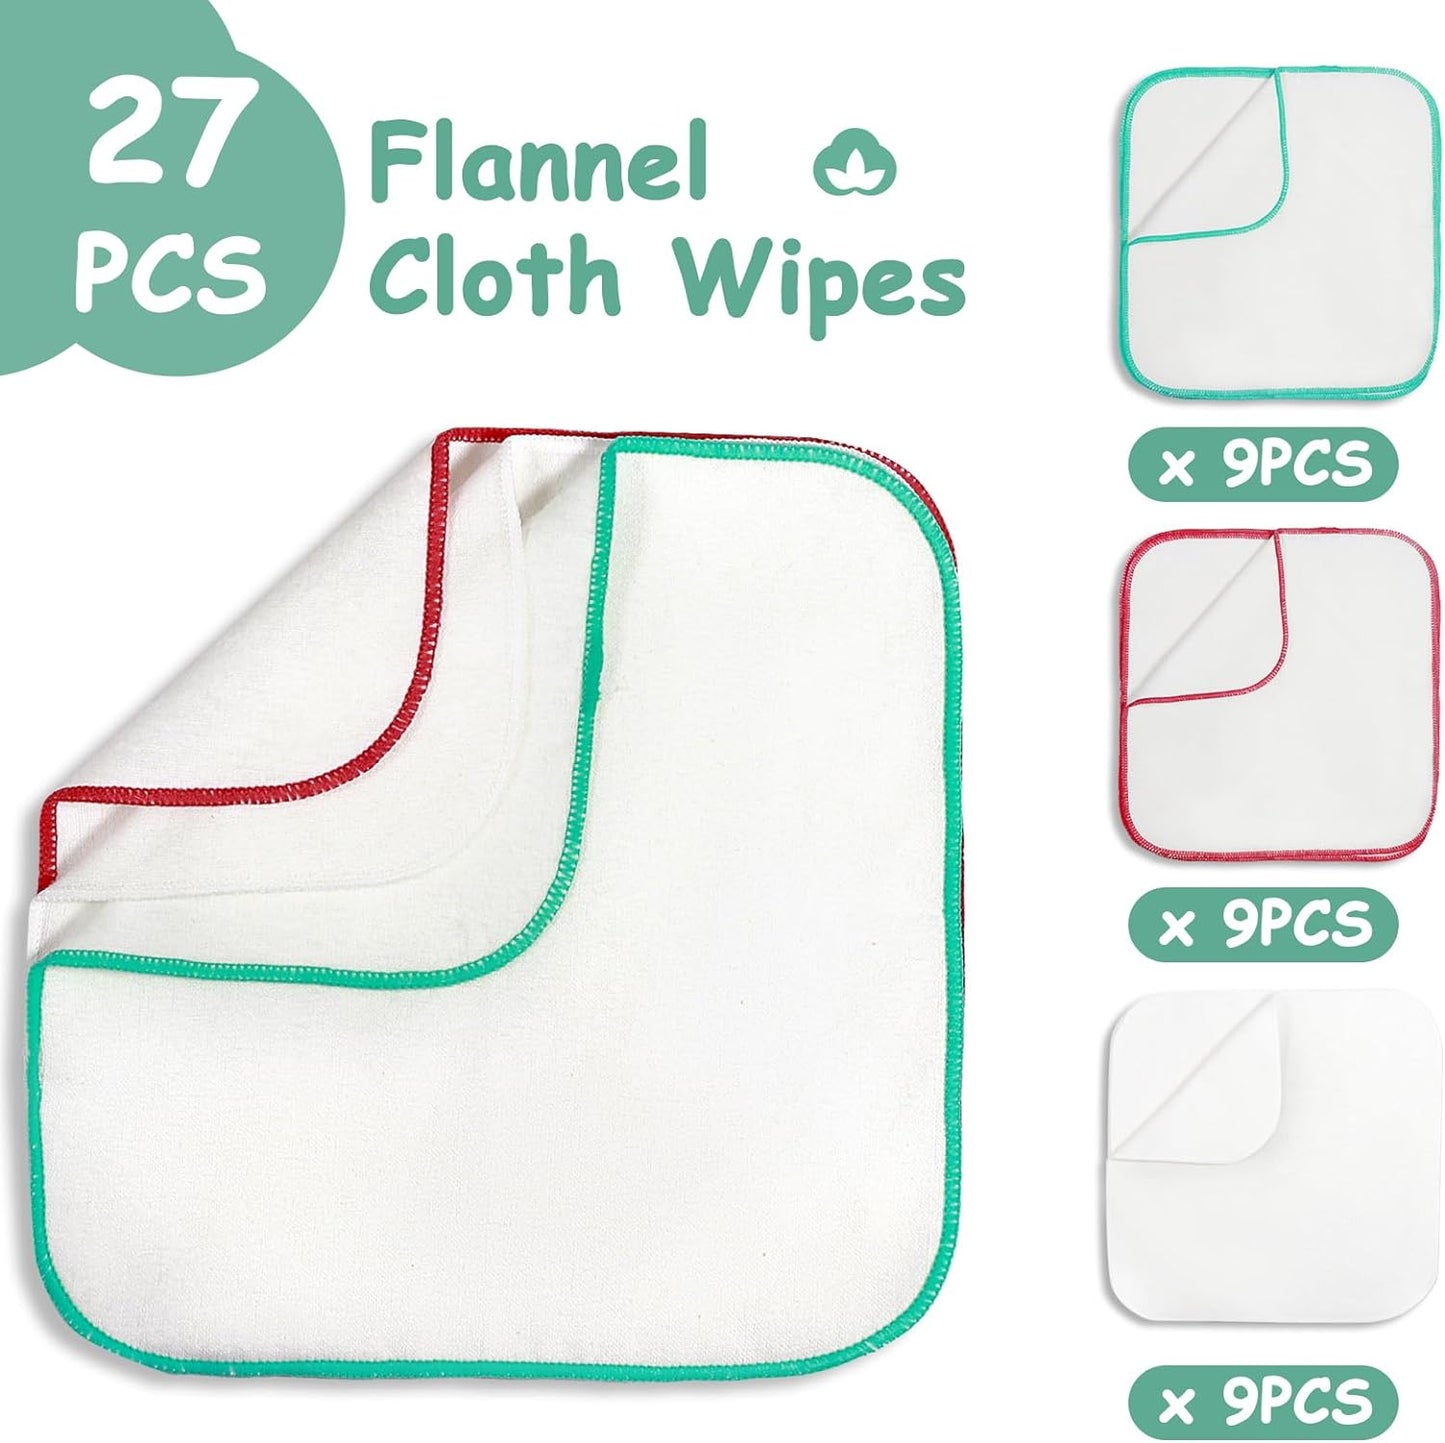 FAMOPLY 27 PCS Flannel Cloth Baby Wipes with Large Capacity Storage Bag，Reusable Natural Cloth Wipes for Baby Daily Cleanup, 8x8 inch Body Face Hand Washcloth Essential for Cloth Diapers